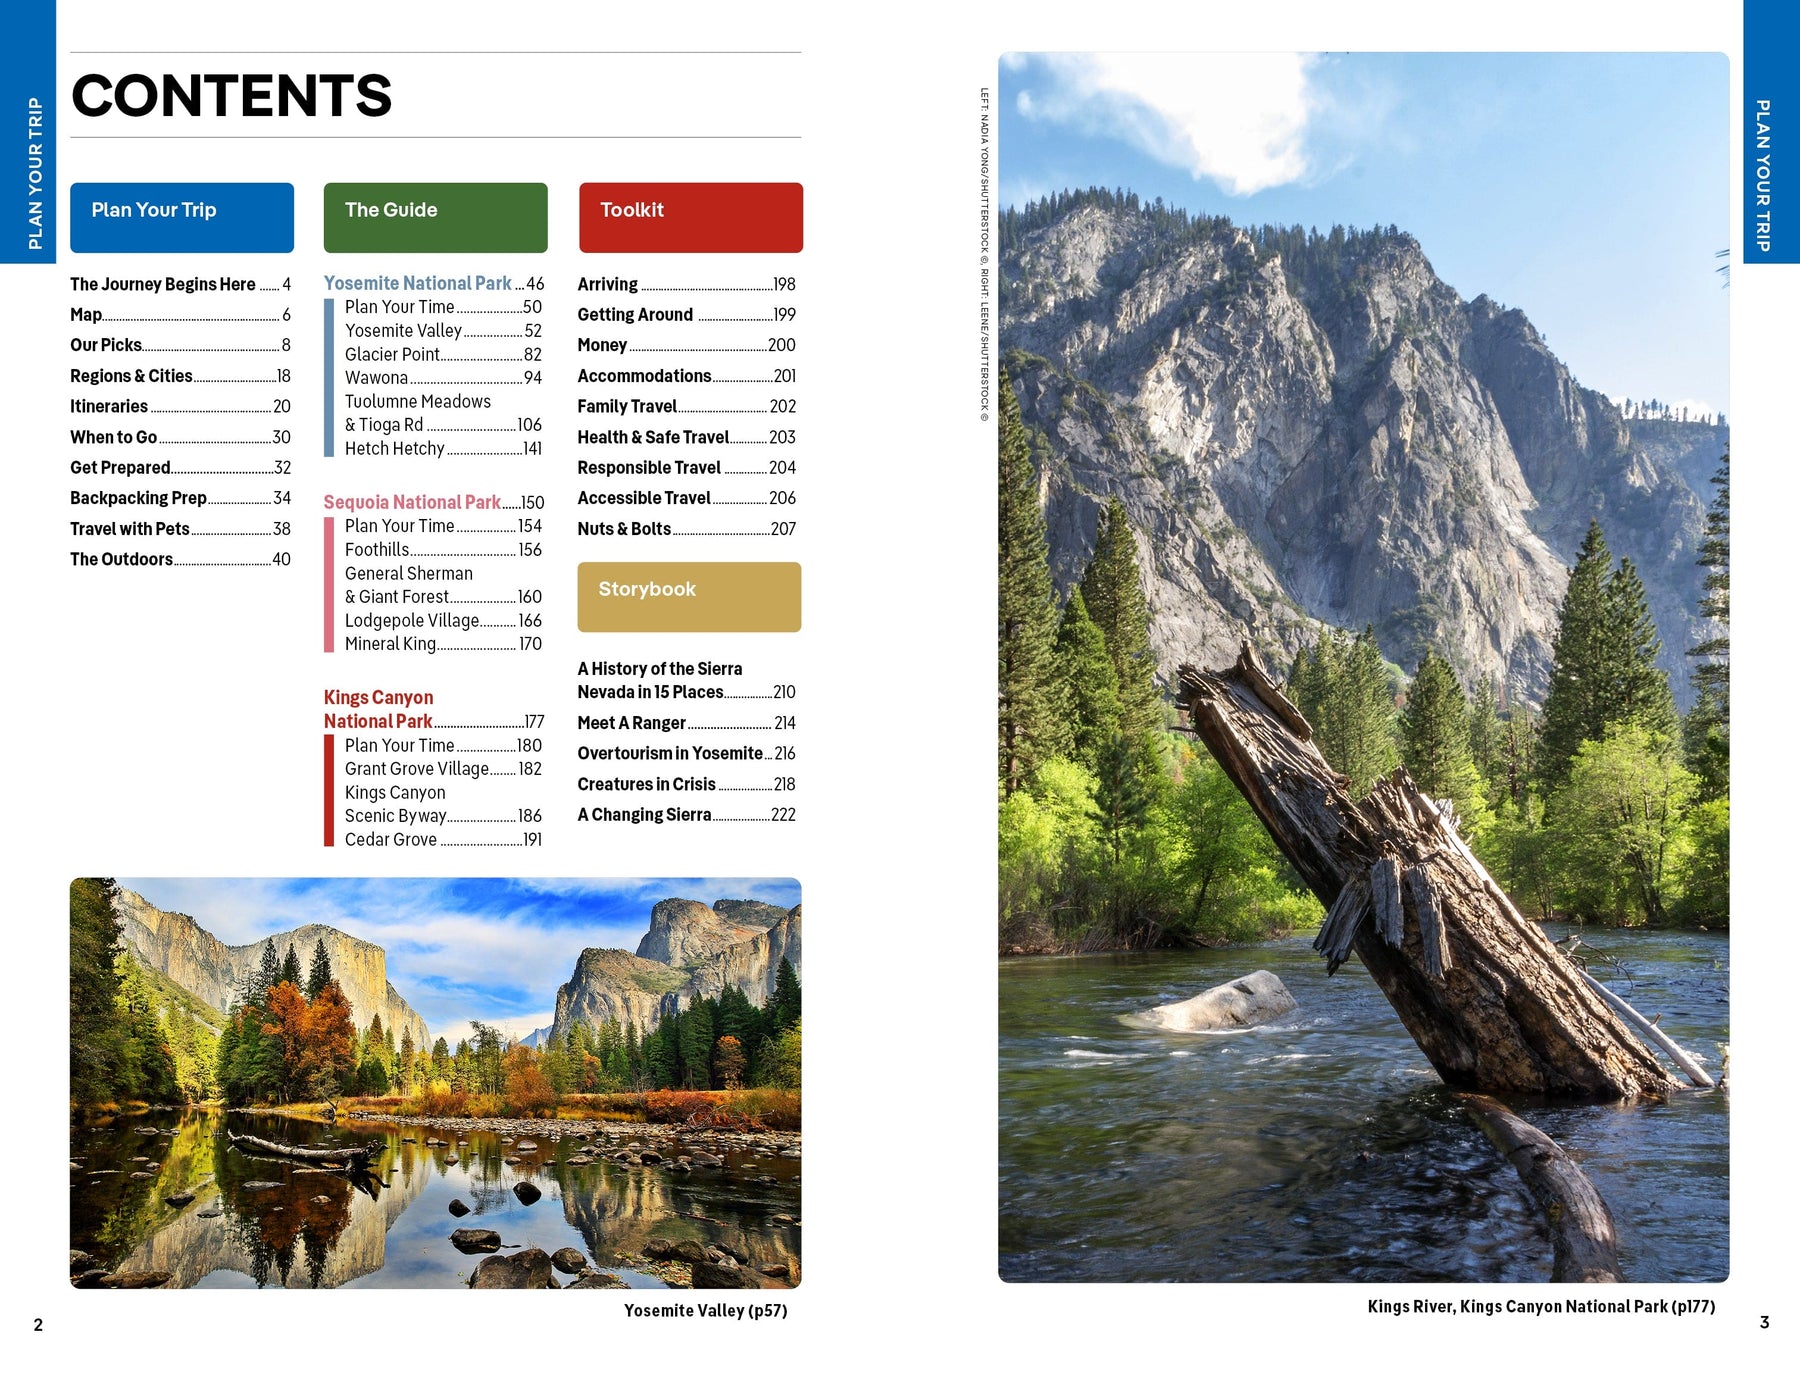 Yosemite, Sequoia & Kings Canyon National Parks - Book + eBook